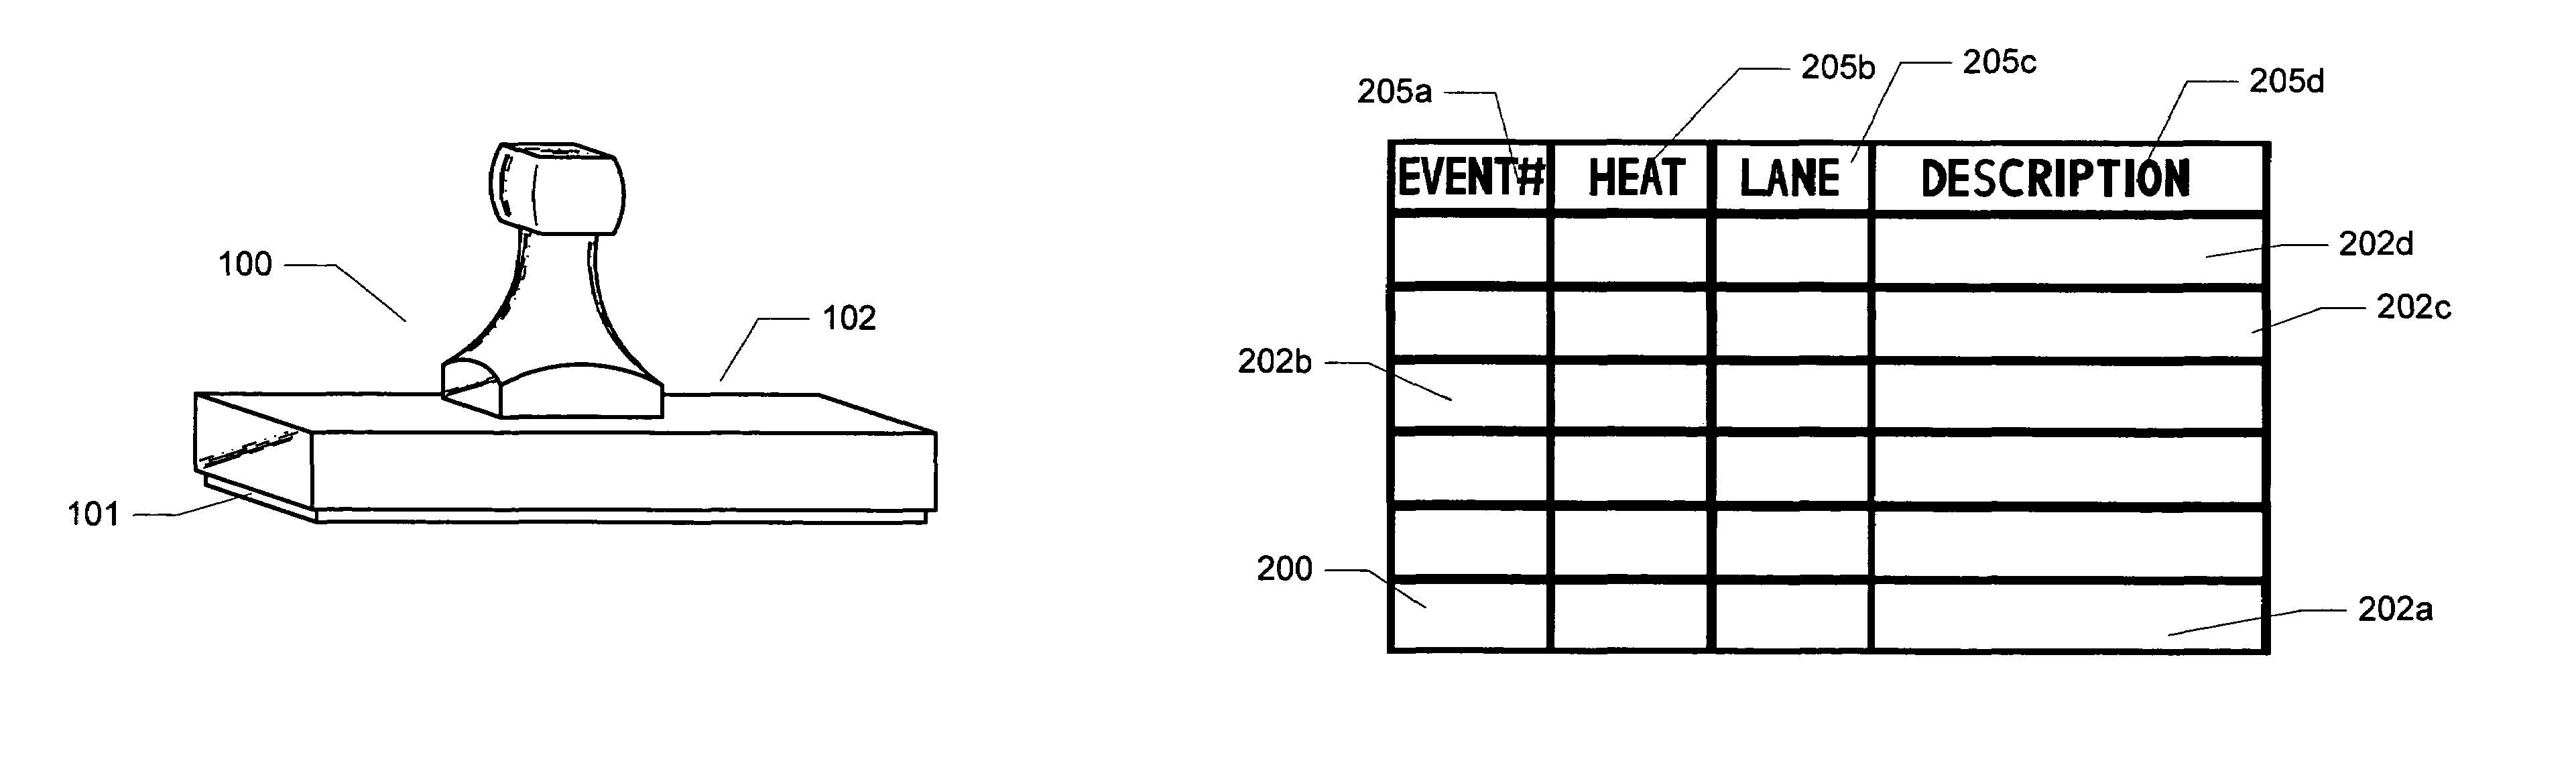 Method for recording multi-event sports meet information on skin